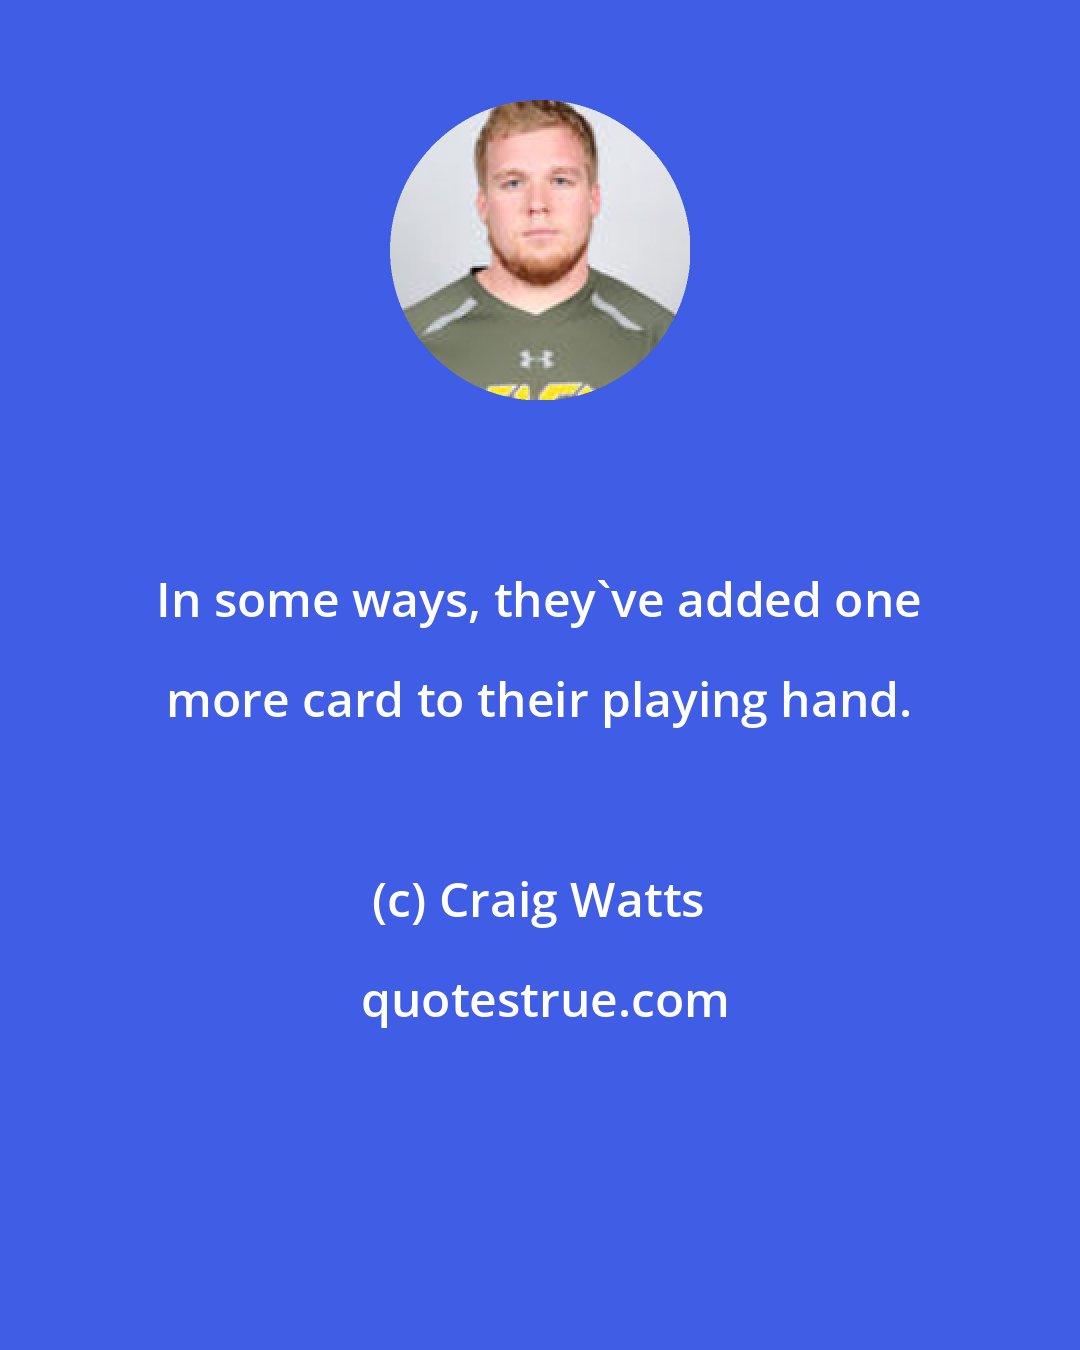 Craig Watts: In some ways, they've added one more card to their playing hand.